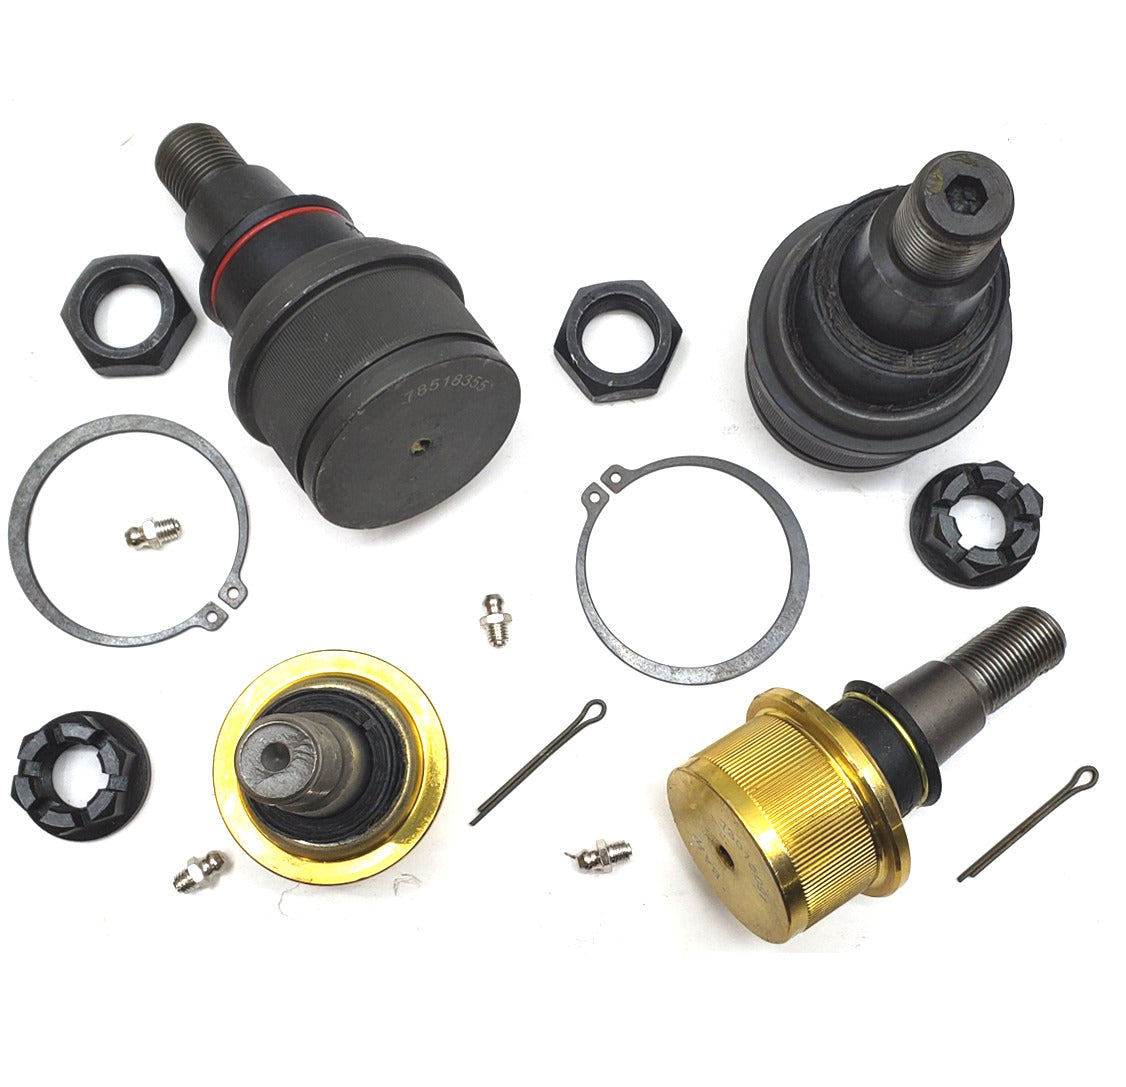 Ford F450 F550 Super Duty 05-10 HD Upper and Lower Ball Joint Suspension Kit